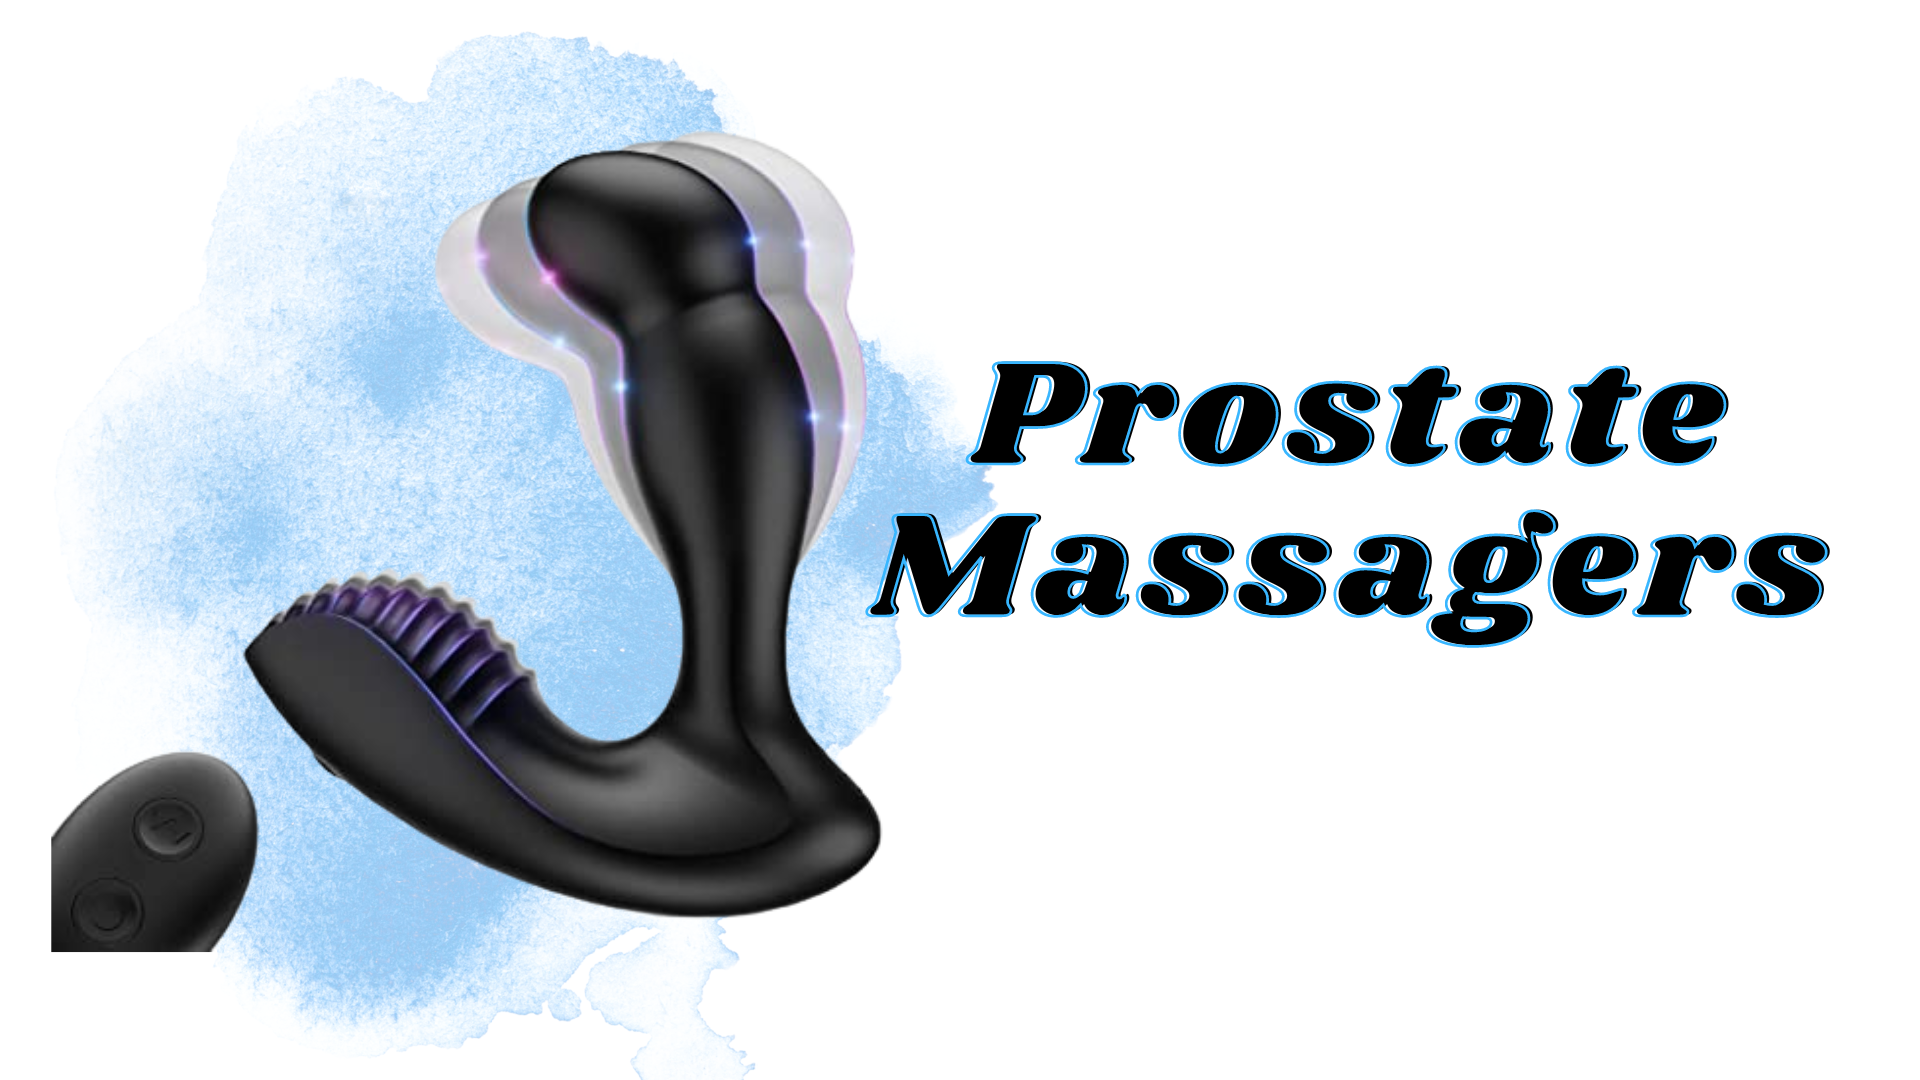 A black Prostate Massager with a remote